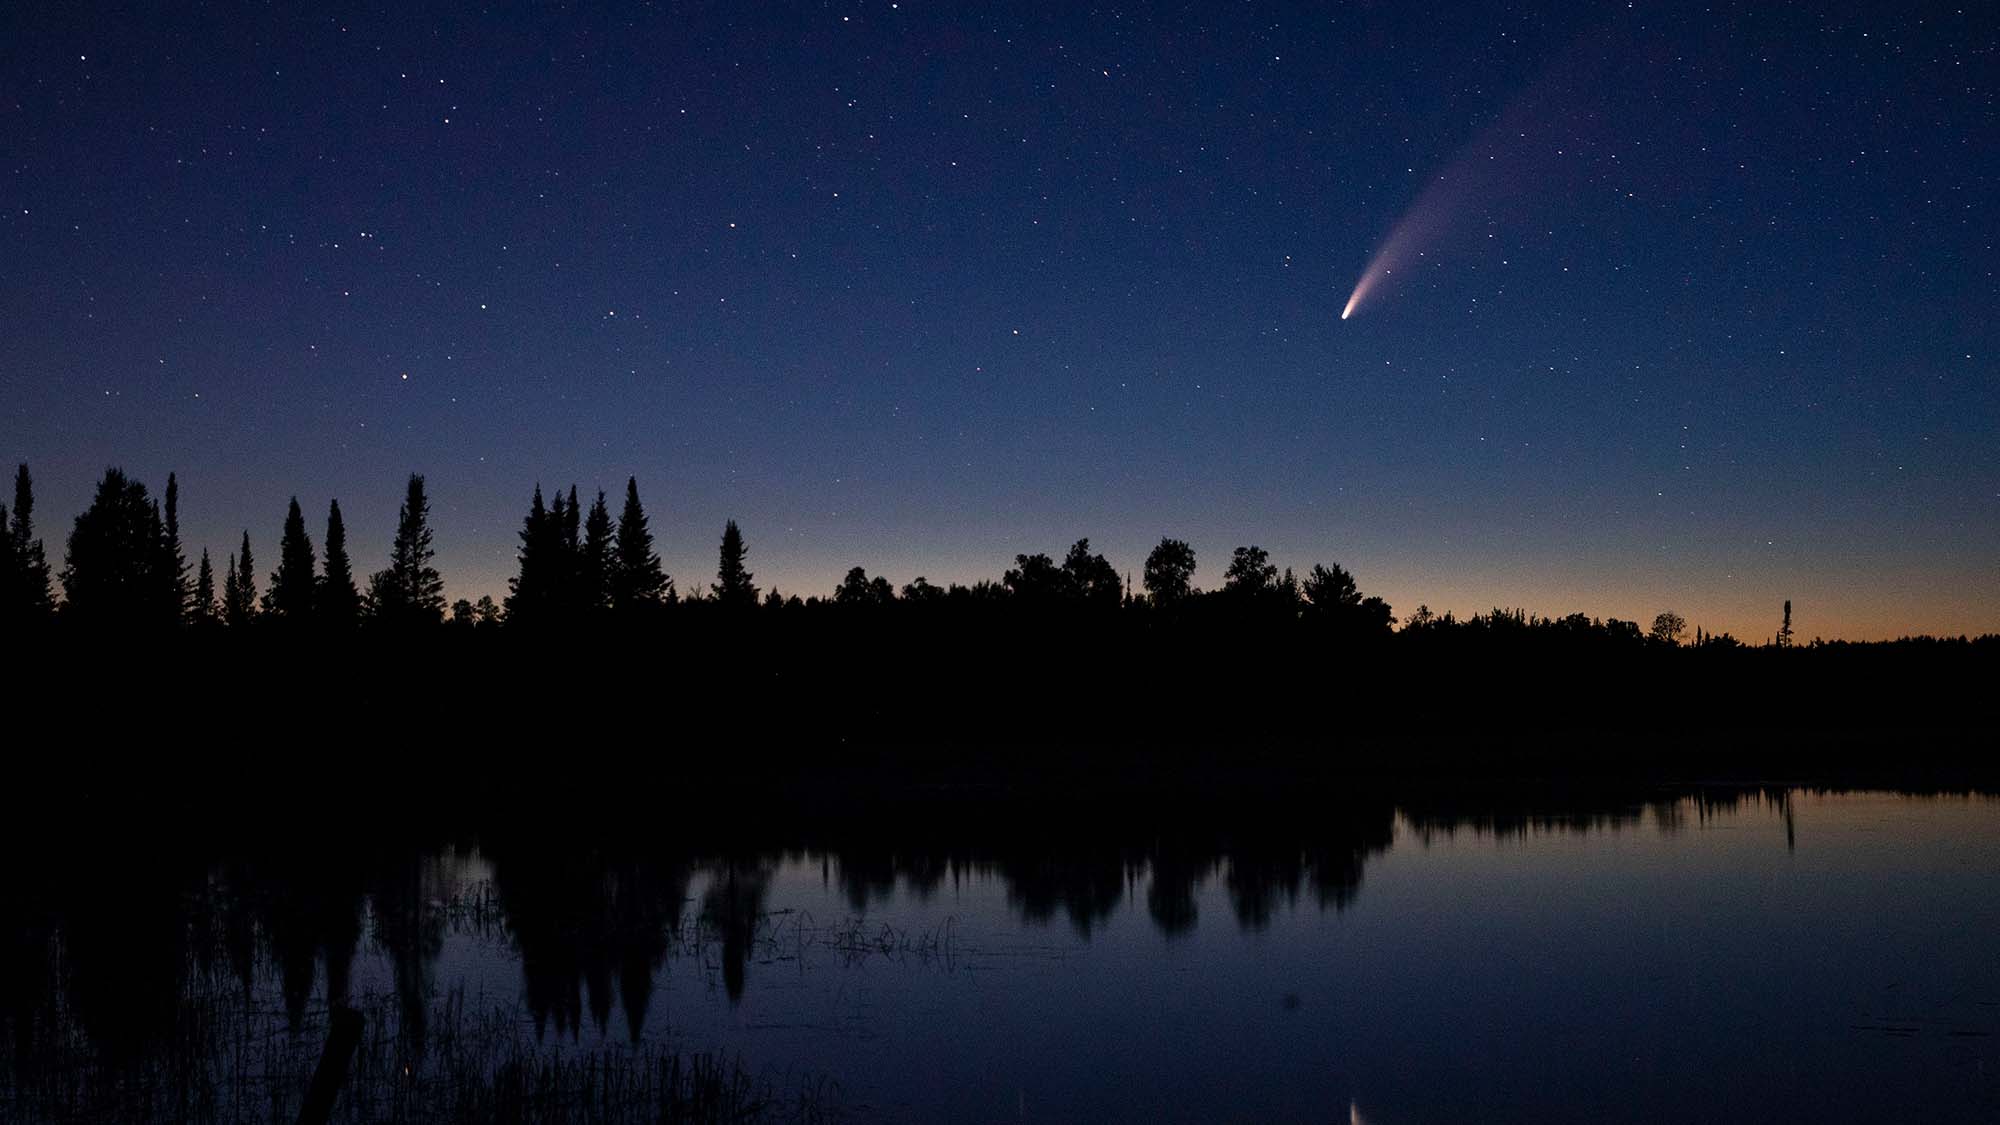 The comet NEOWISE streaked across the night sky over Wolf Lake in Brimson, Minnesota.